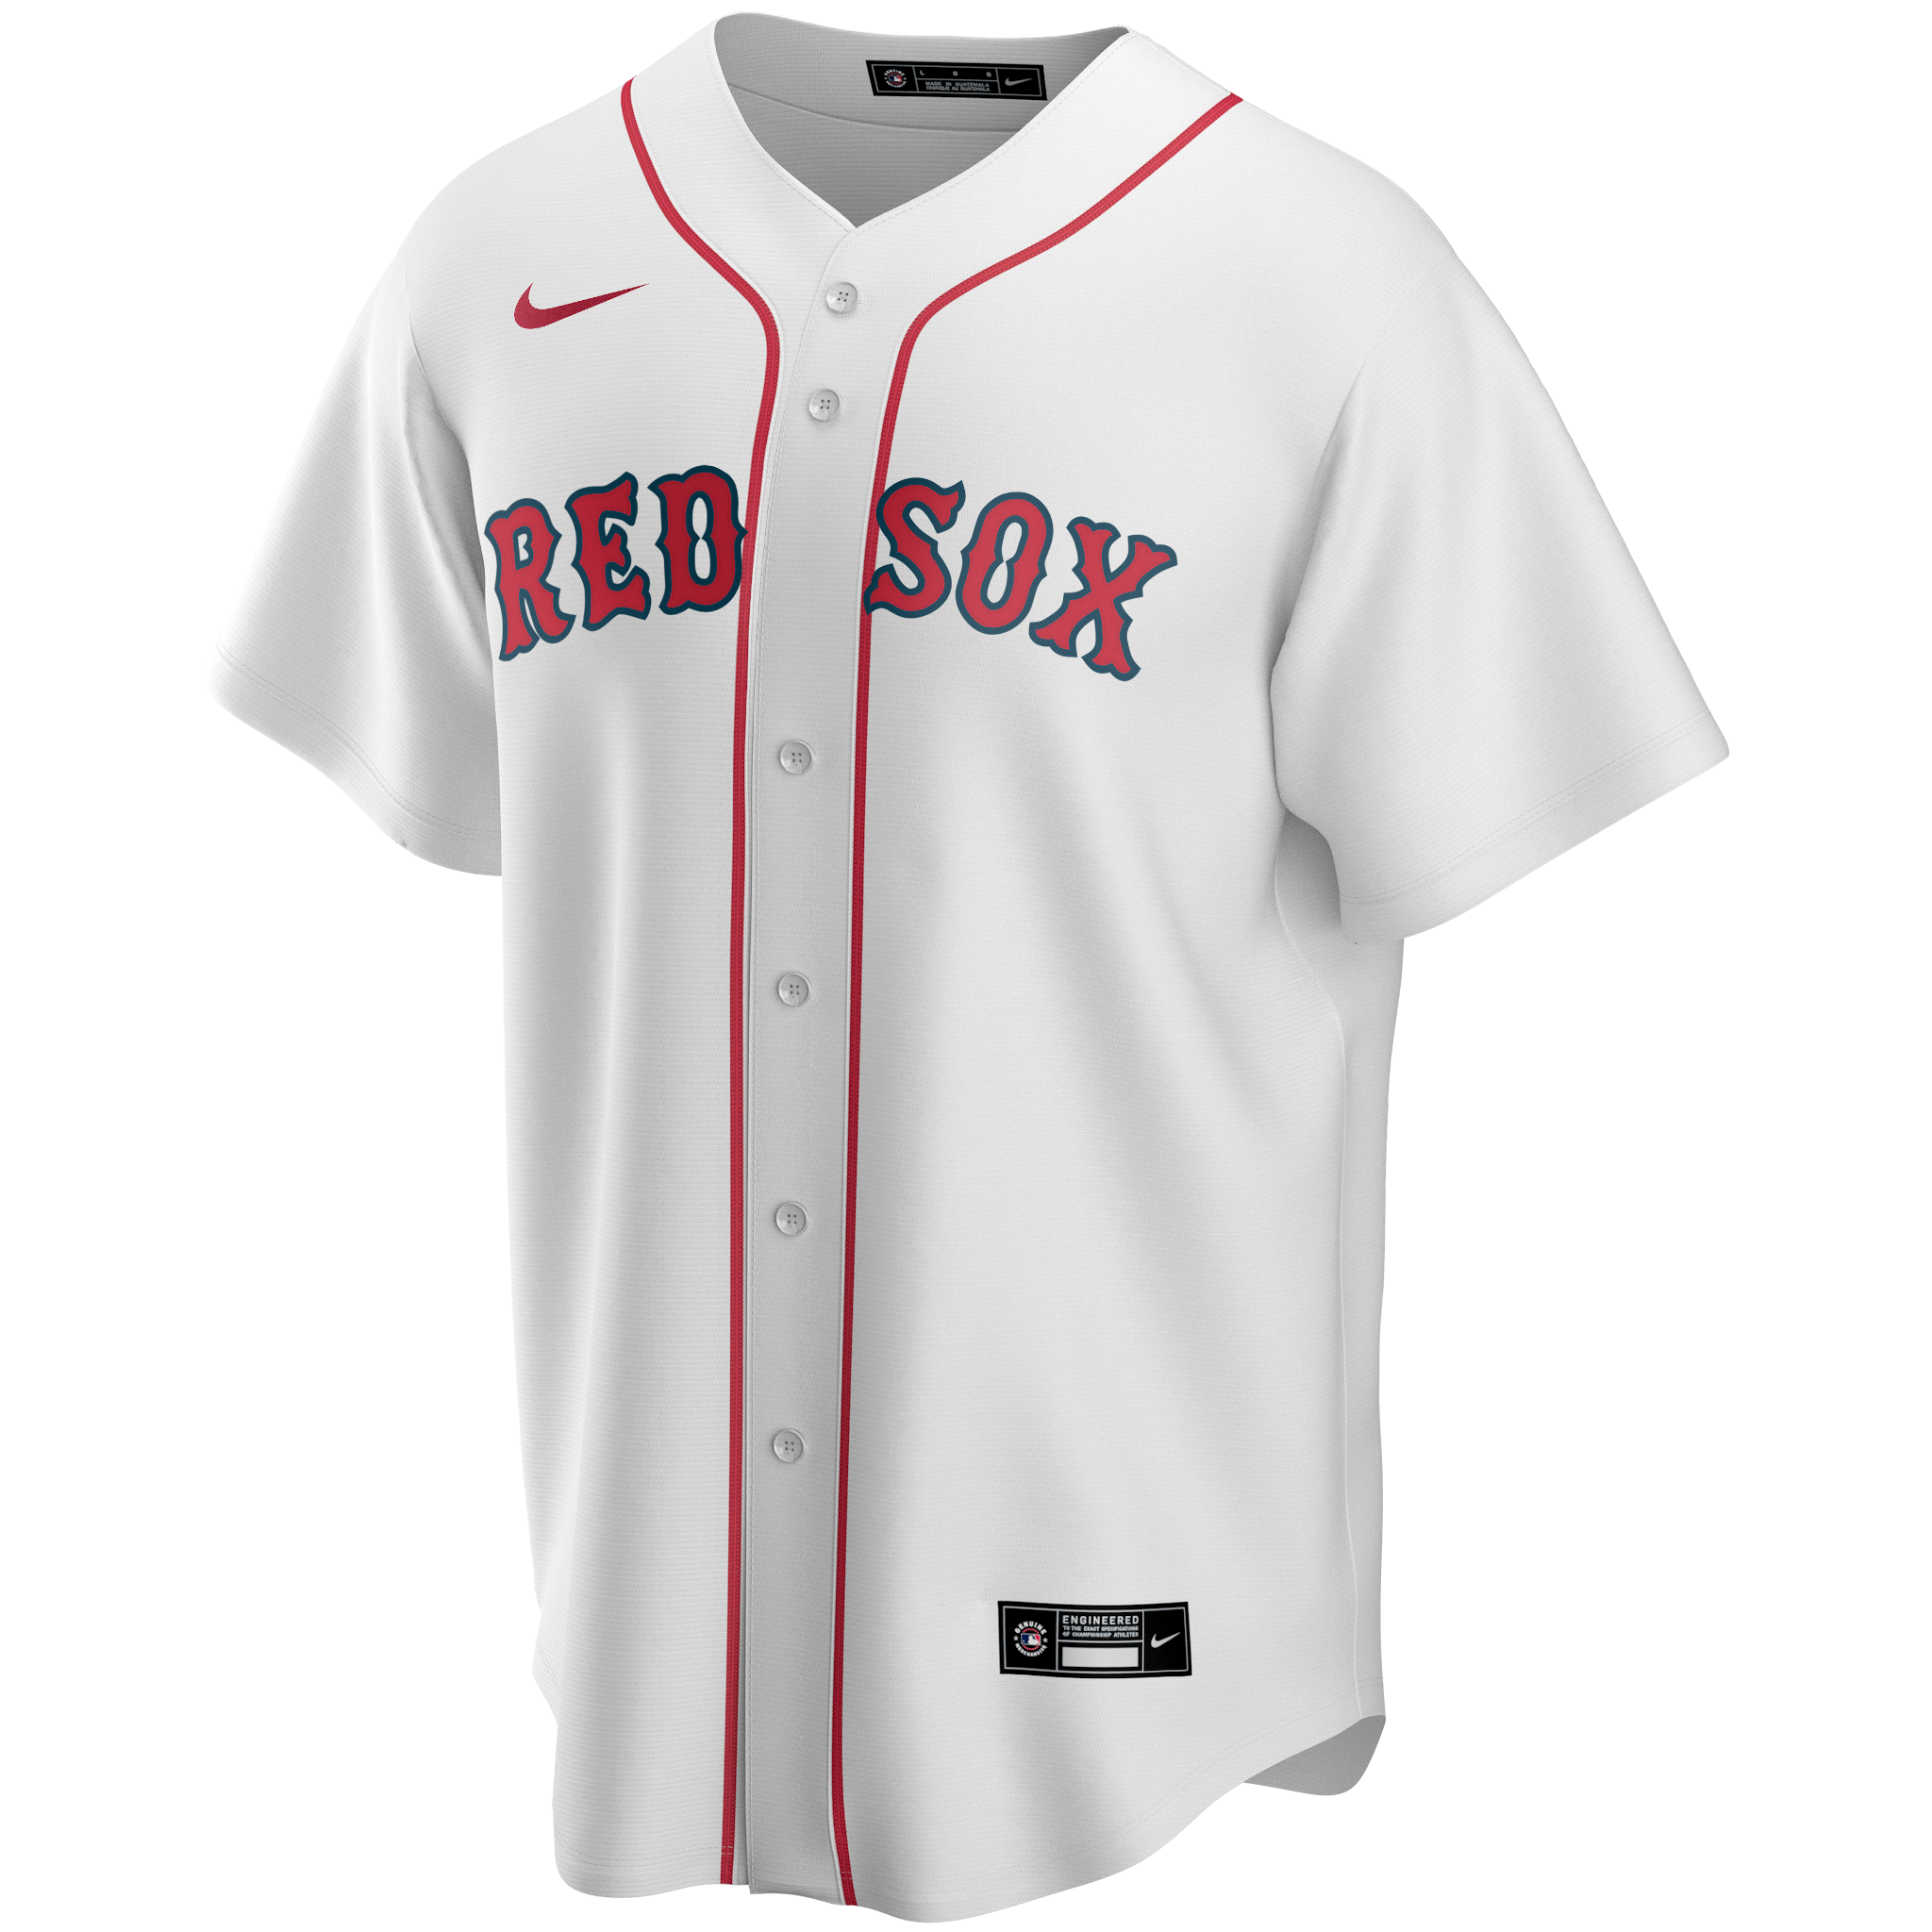 Rafael Devers Jerseys (All-Star & Yellow Versions Available